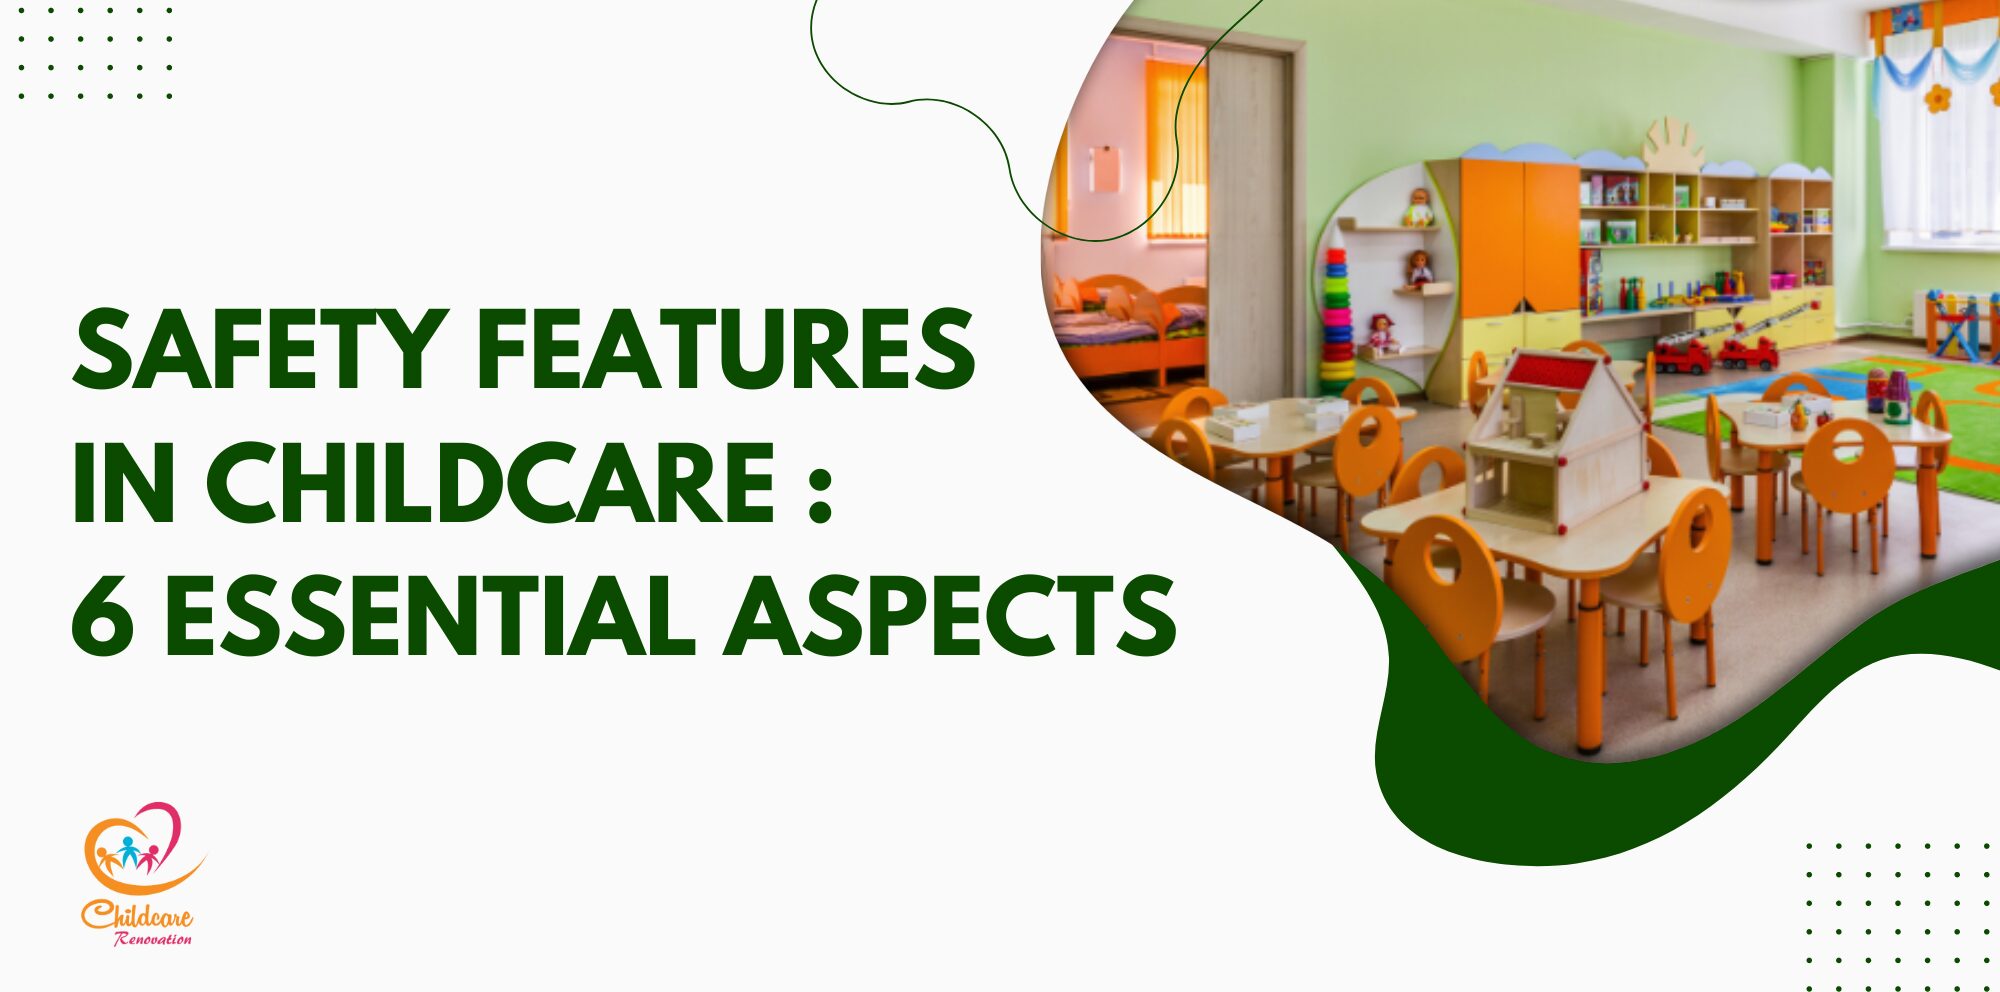 Safety Features in Childcare : 6 Essential Aspects